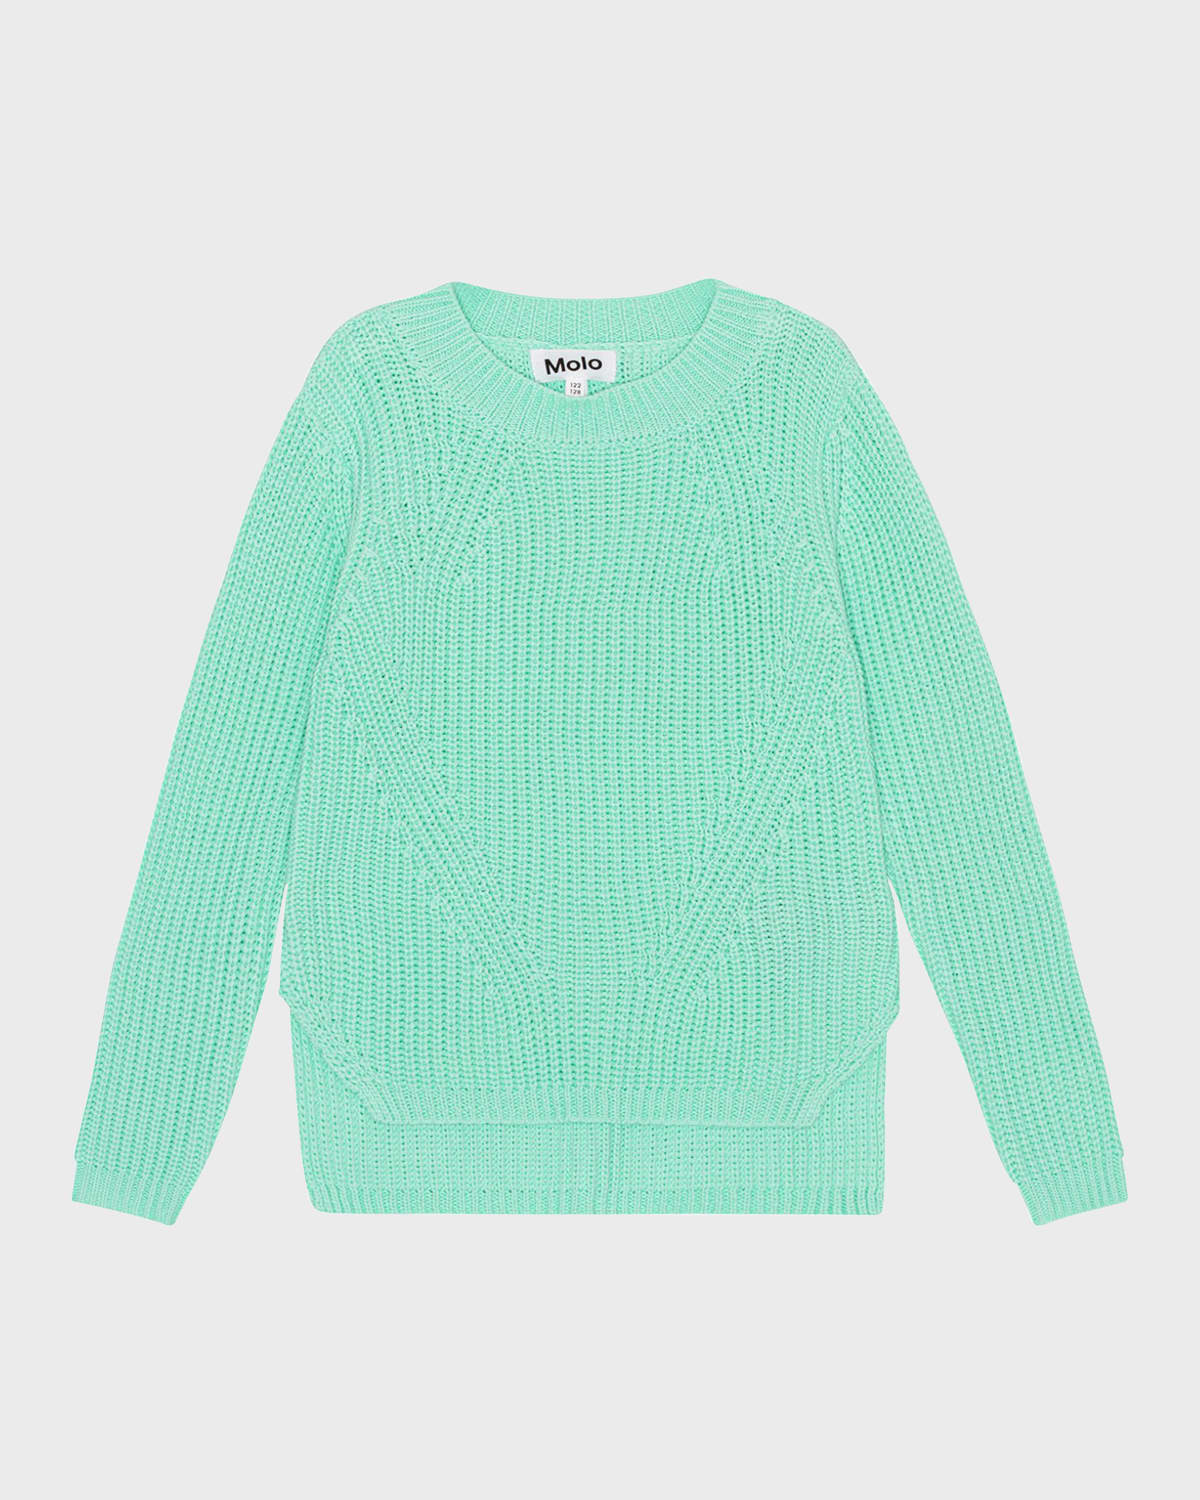 Molo Kids' Girl's Gillis Knitted Sweater In Cool Mint